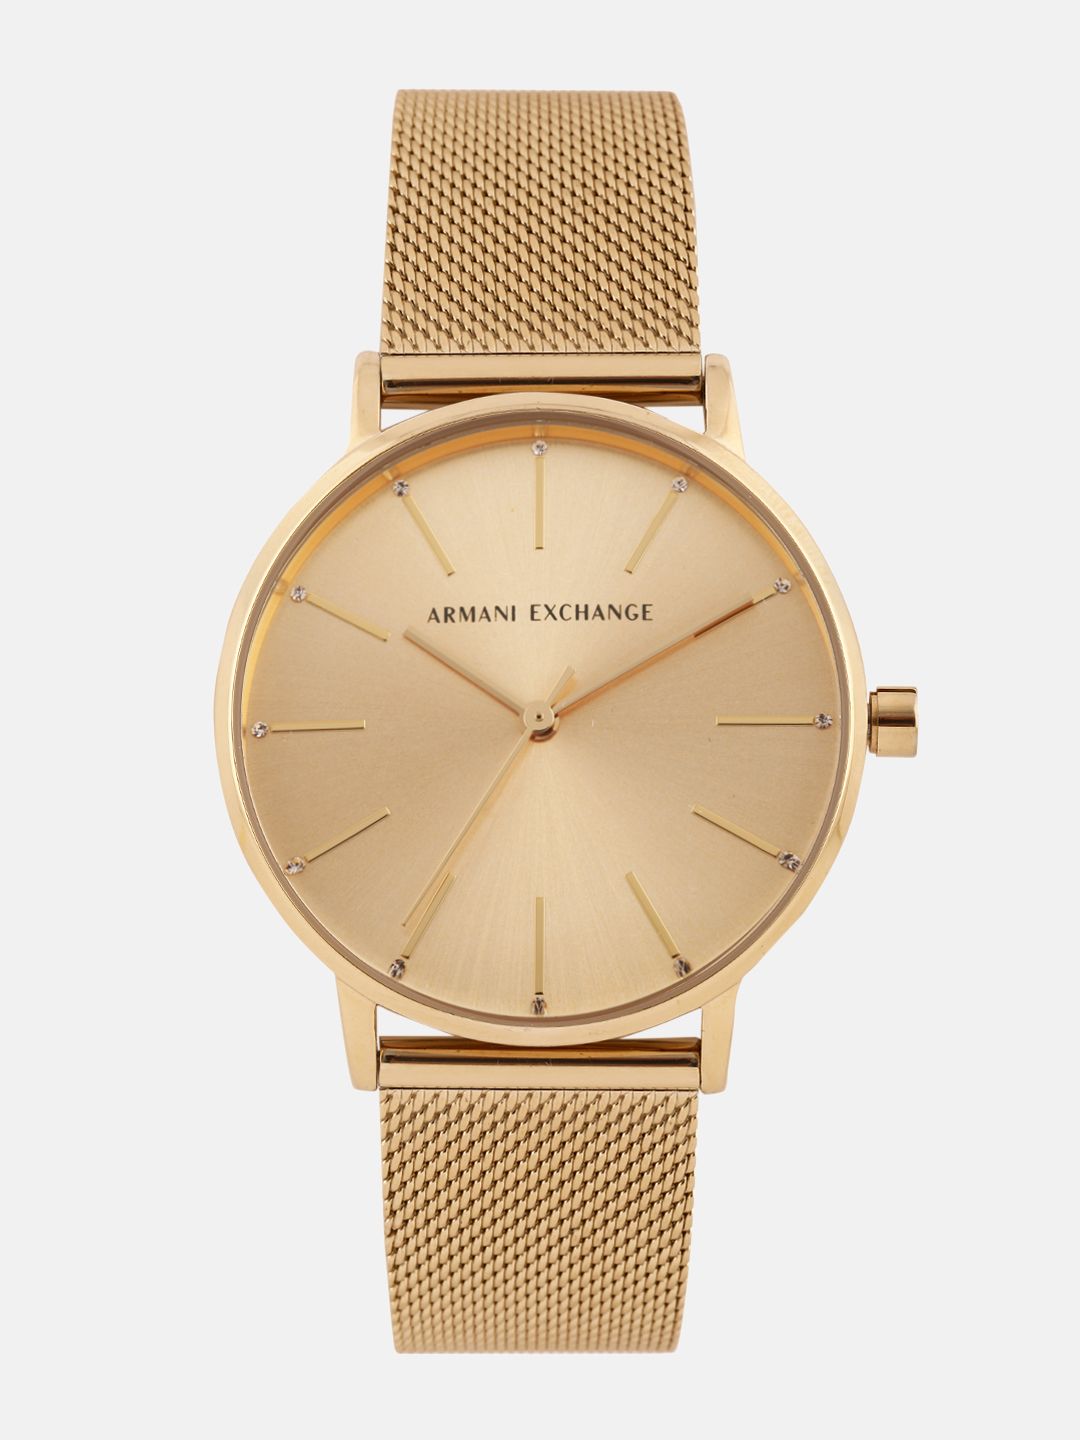 Armani Exchange LOLA Women Gold Analogue Watch AX5536 Price in India